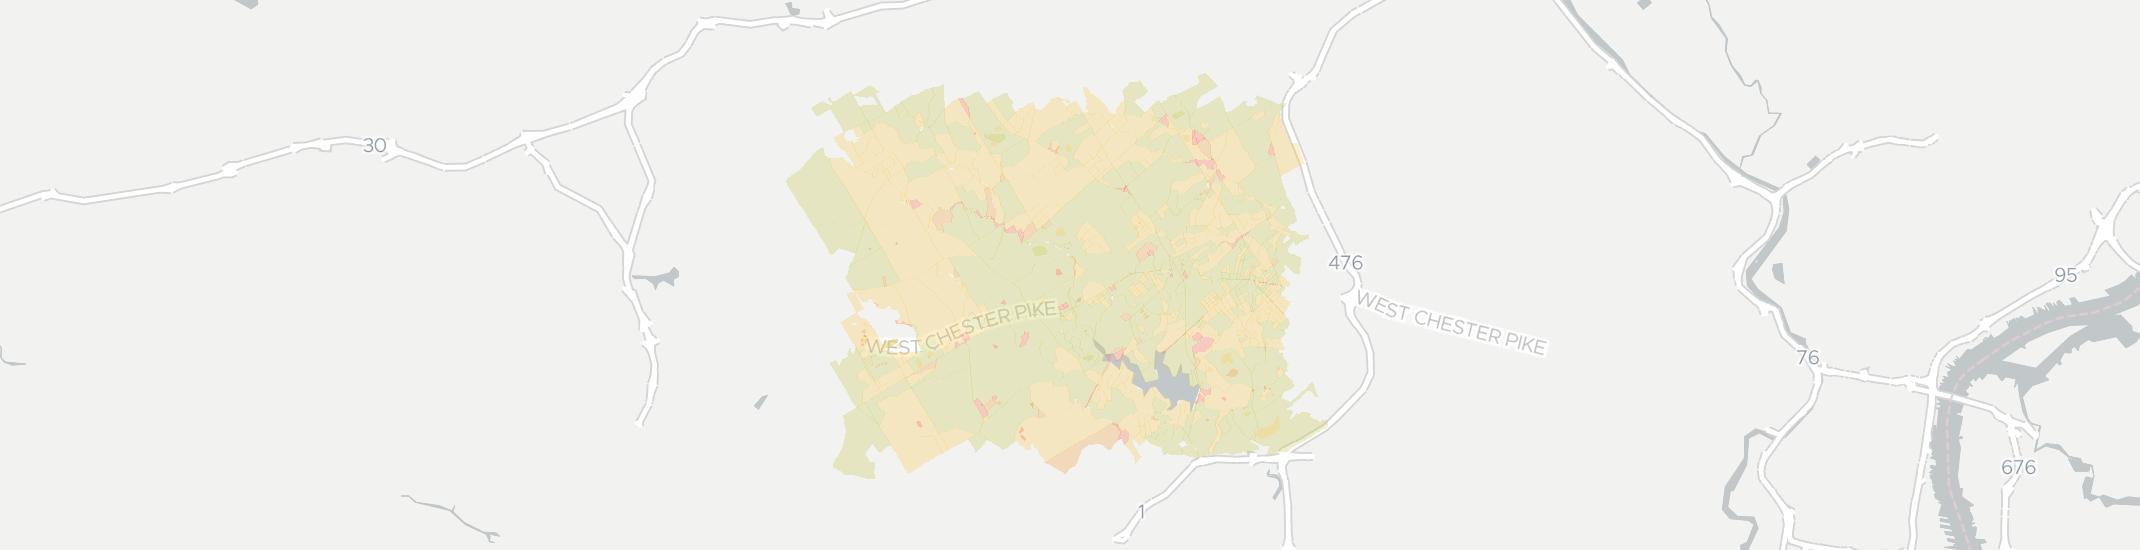 Newtown Square Internet Competition Map. Click for interactive map.